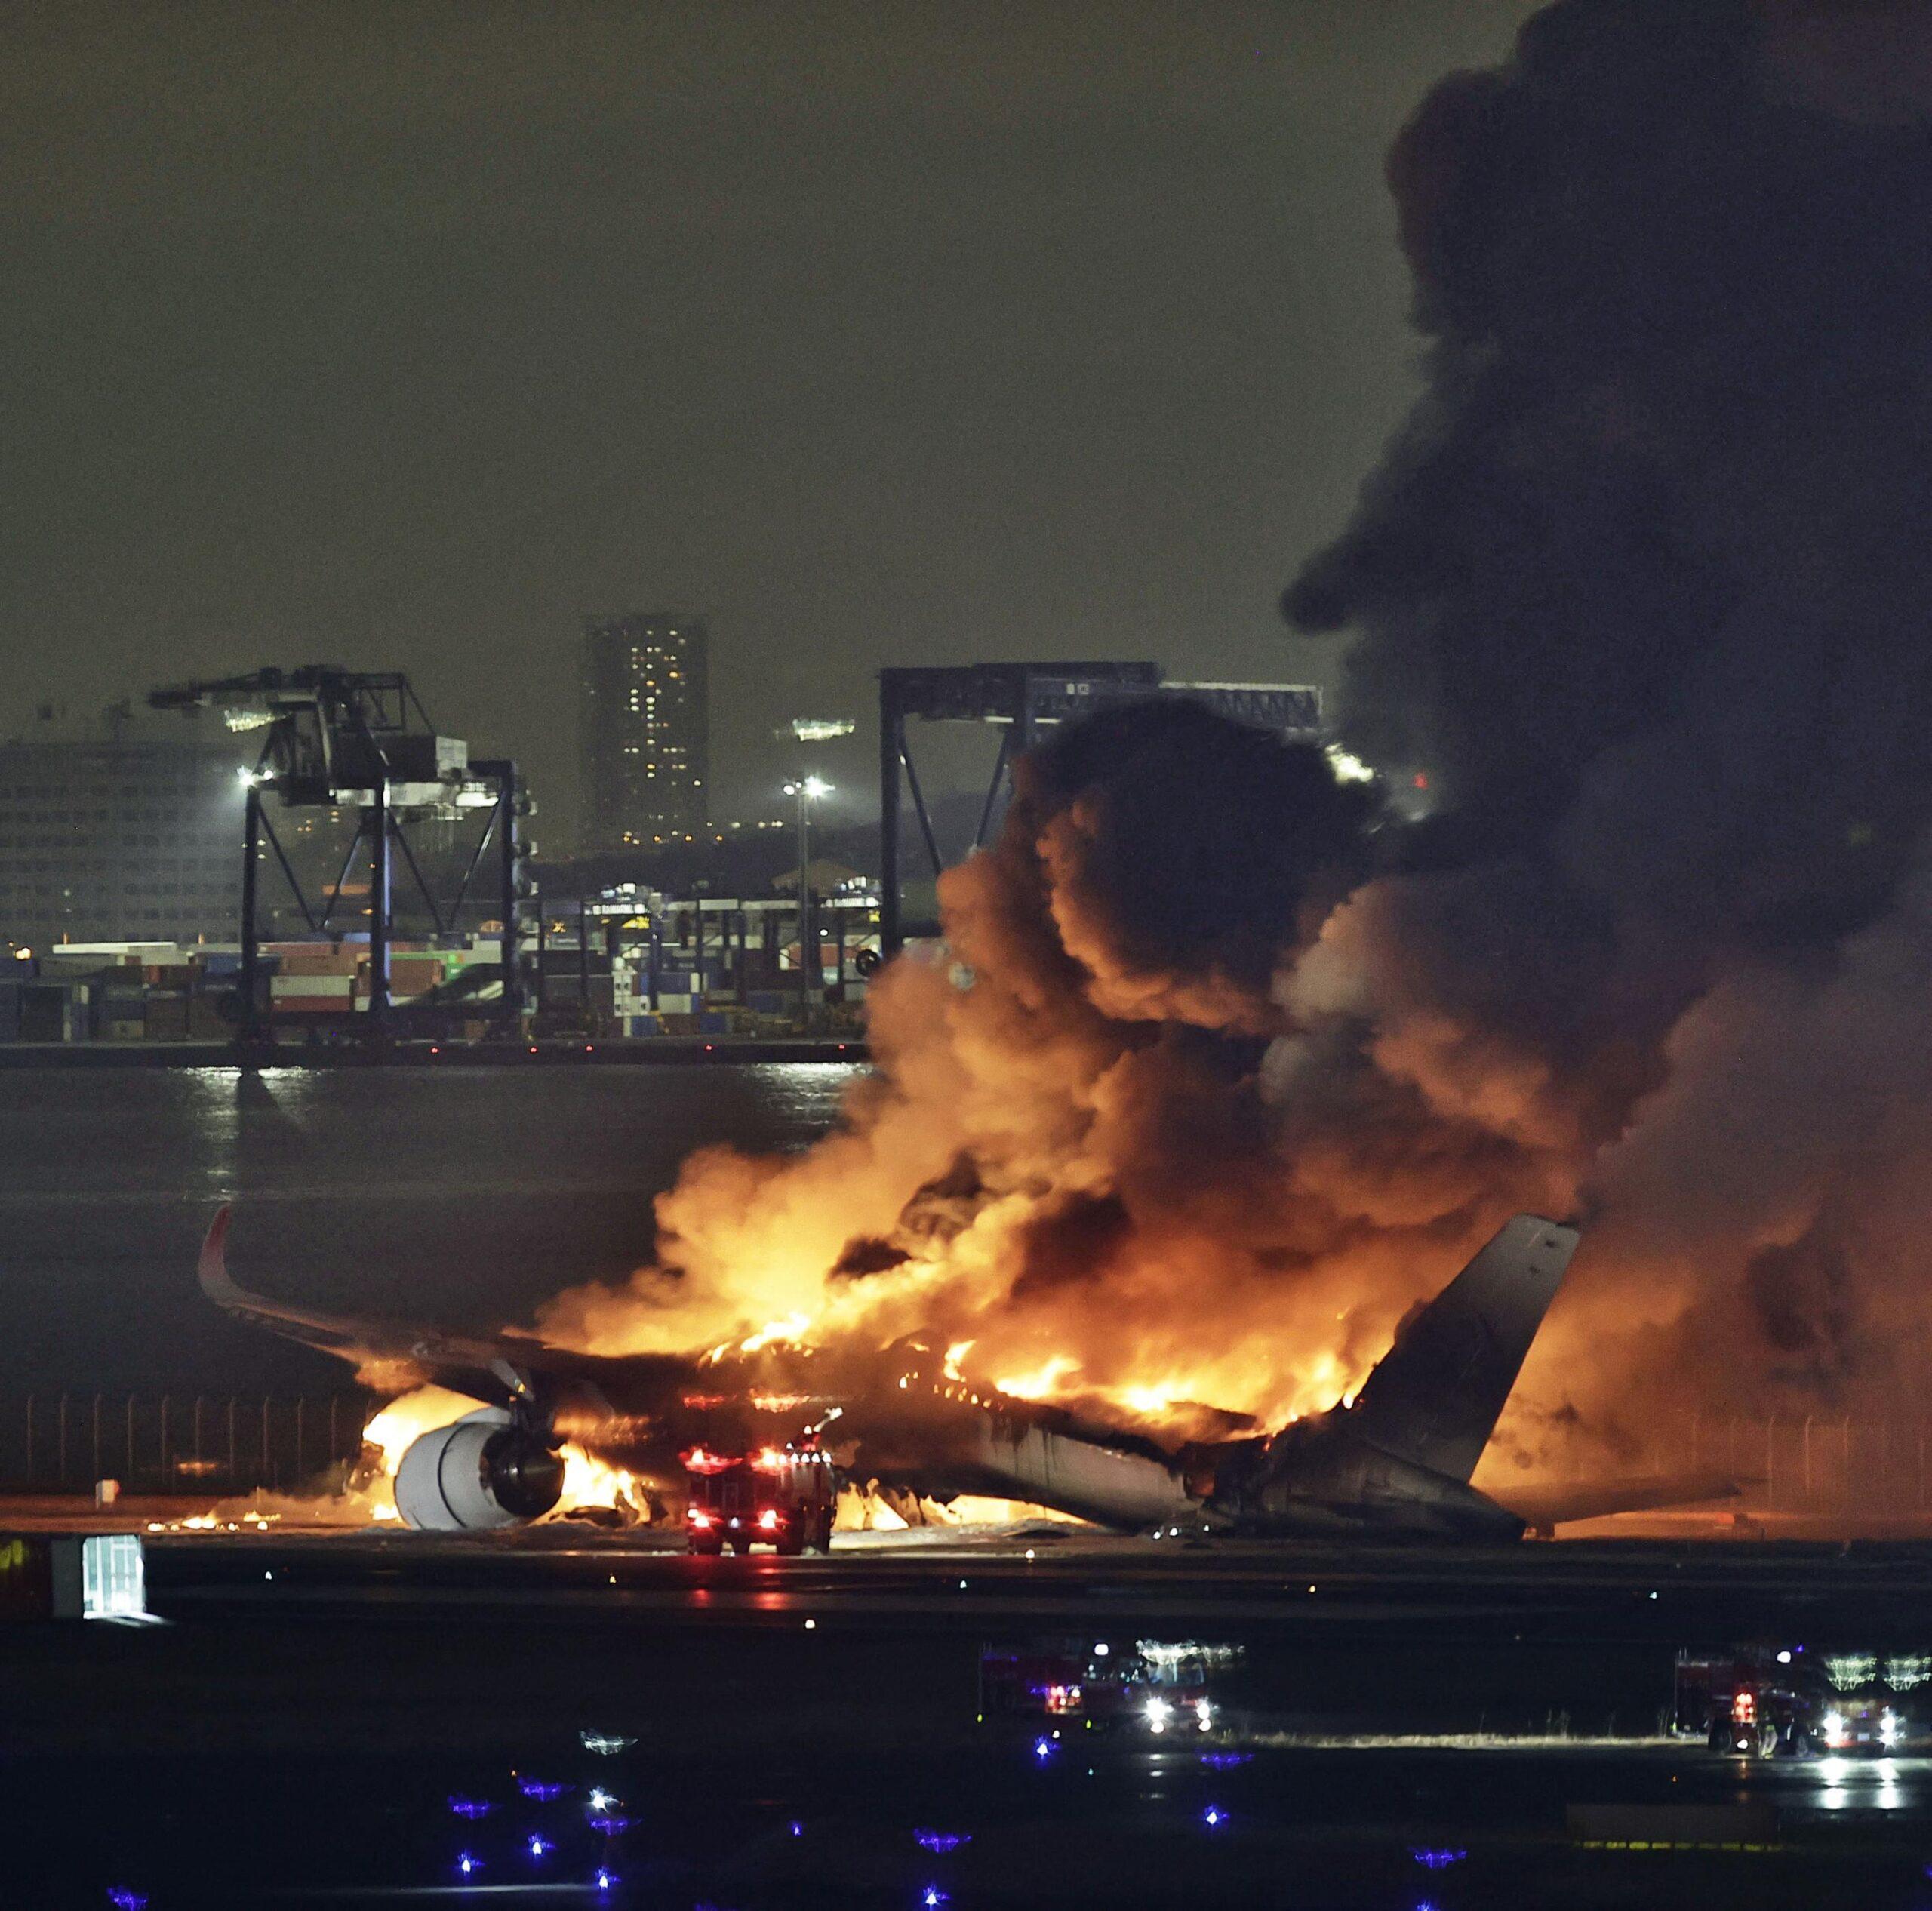 Japan Airlines Plane Involved In Horrific Crash: Video Footage Released